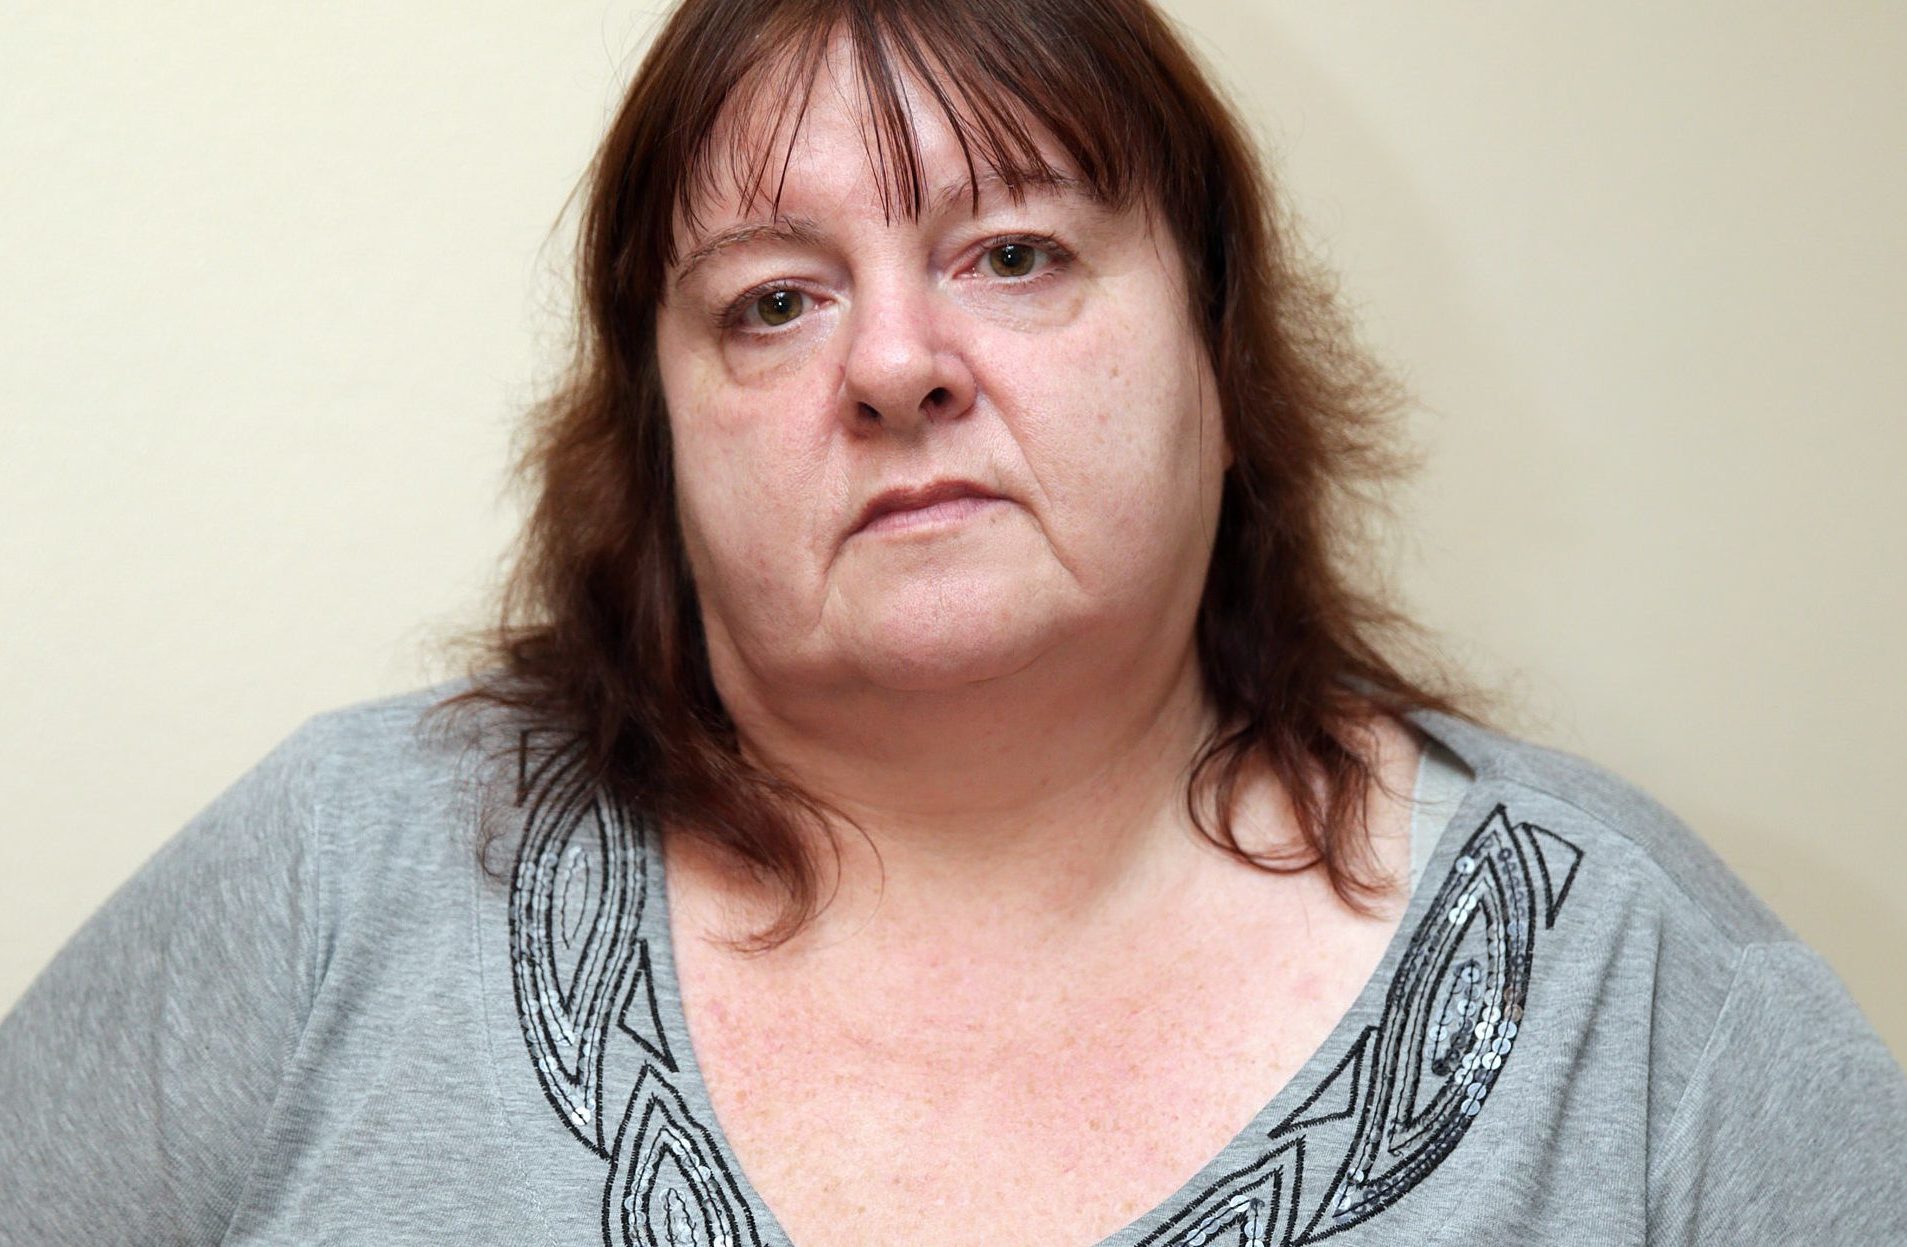 Yvonne Heath has vowed to fight on to get the truth behind her son's death at Deepcut.